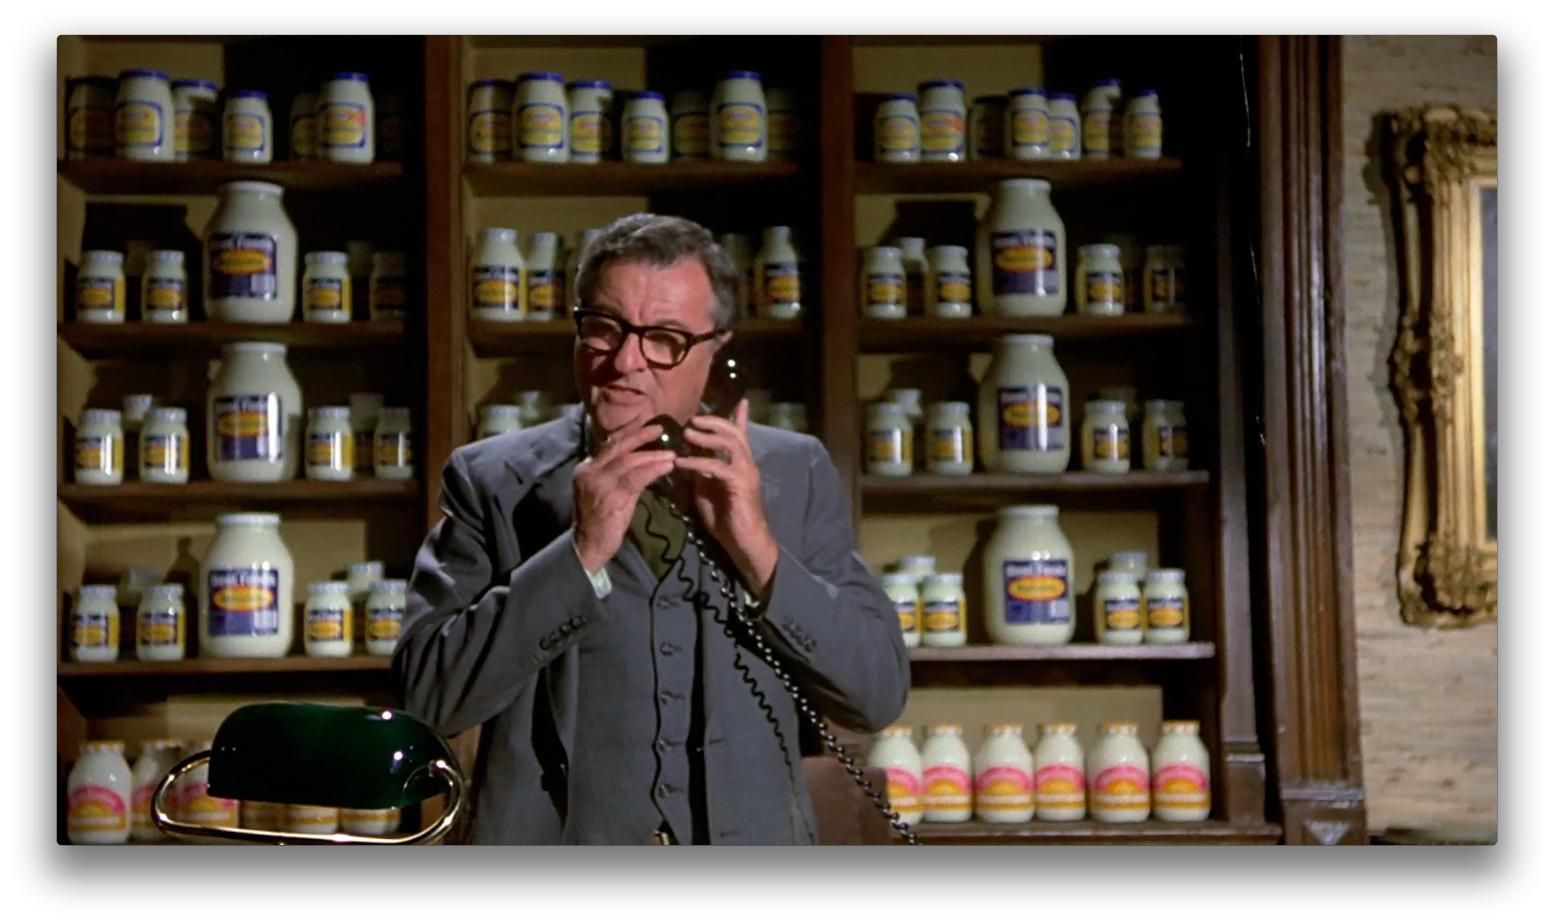 Must have seen Airplane! 100 times and never noticed the background at the Mayo Clinic.